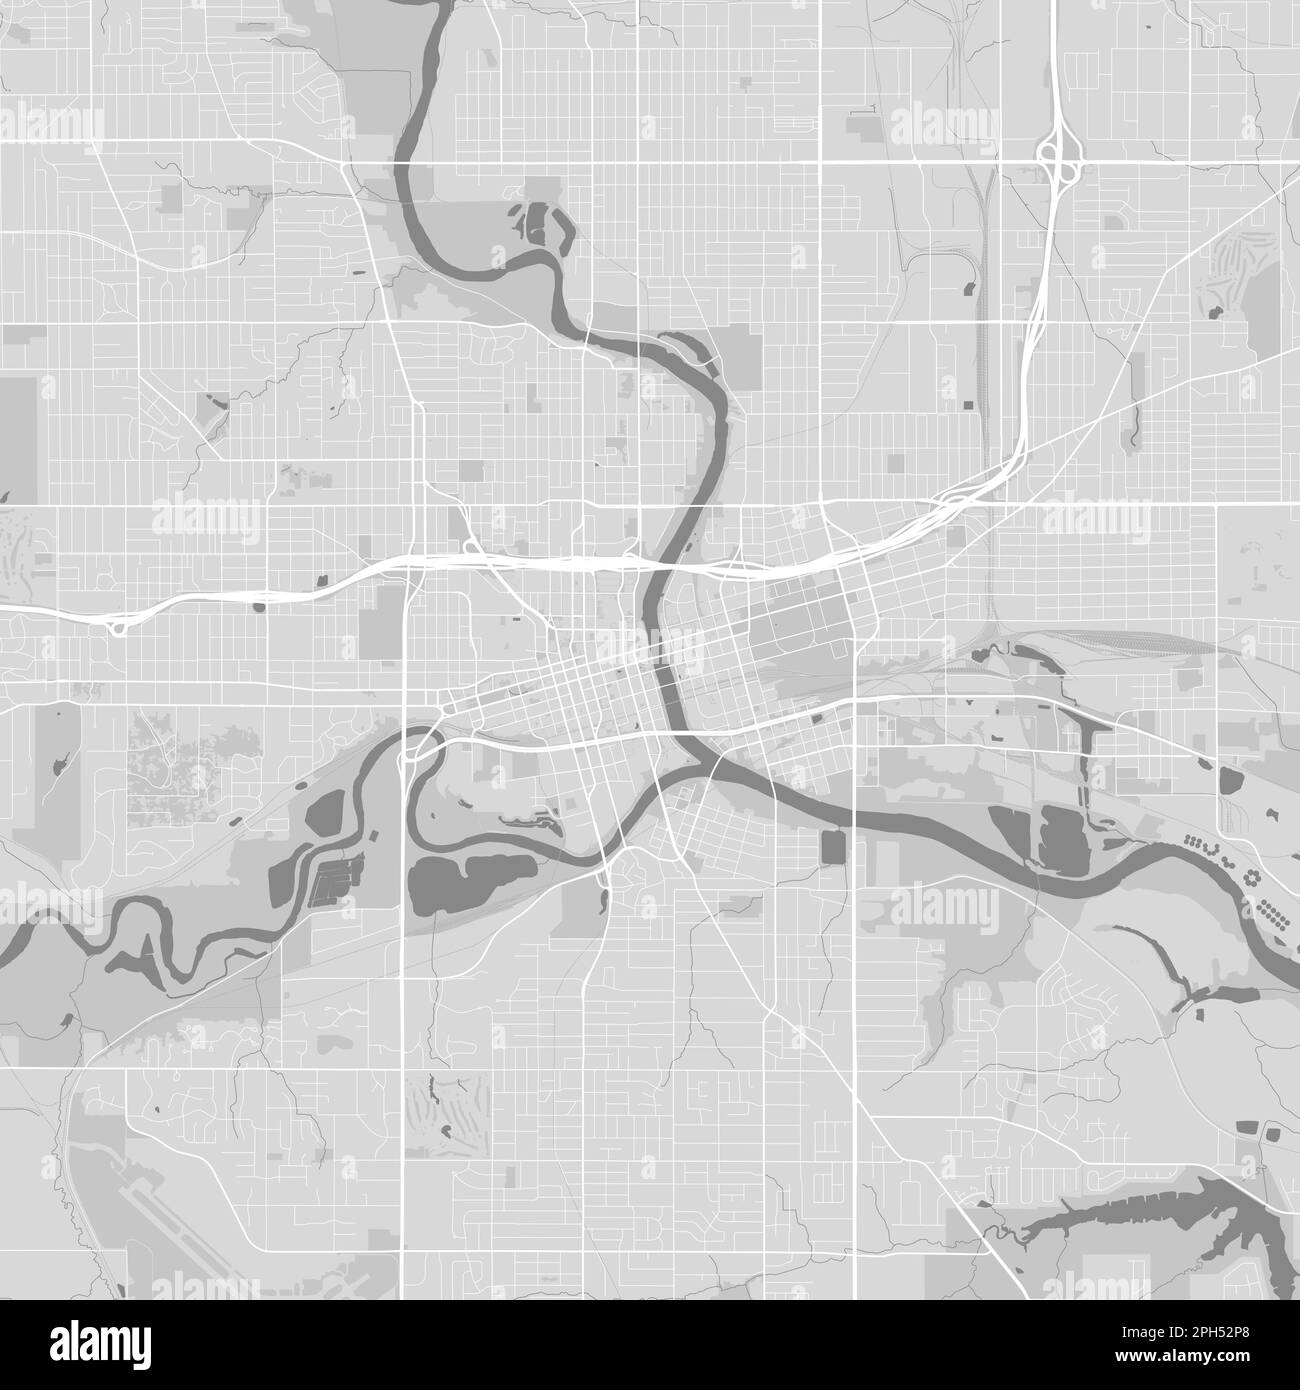 Map of Des Moines city, Iowa. Urban black and white poster. Road map image with metropolitan city area view. Stock Vector